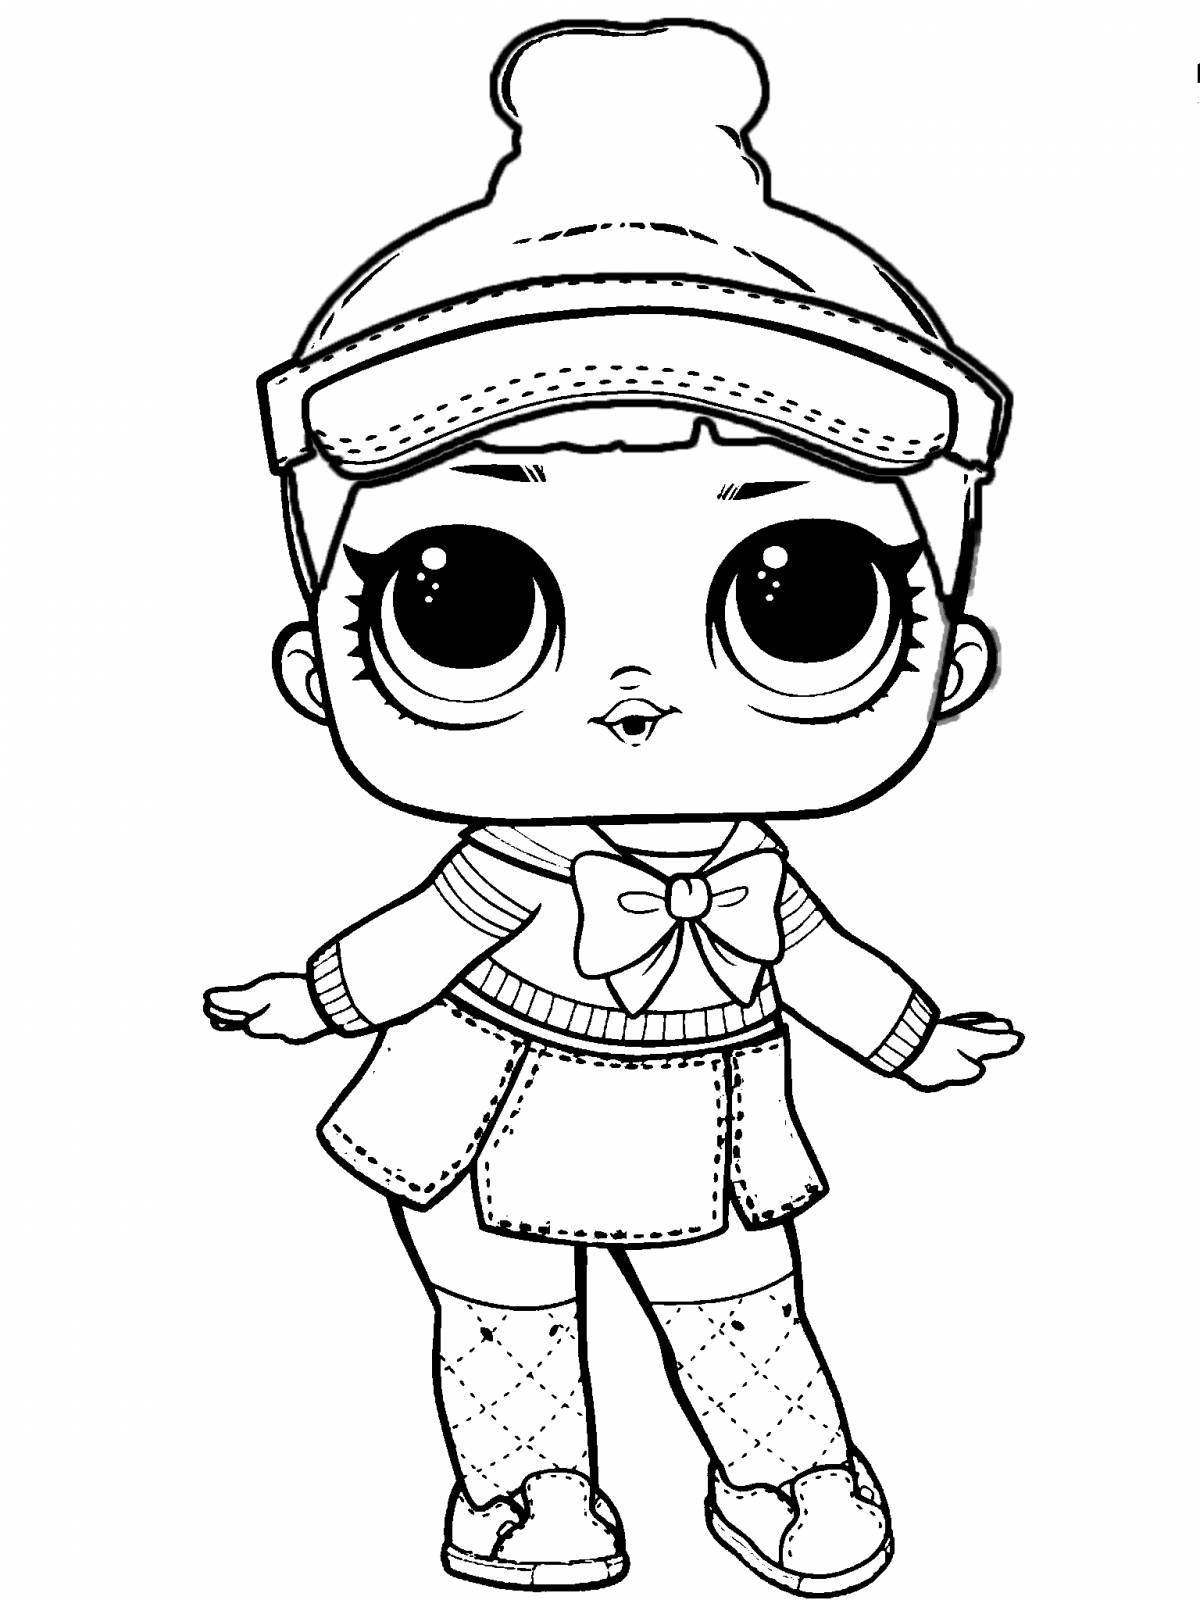 Adorable lol doll coloring book